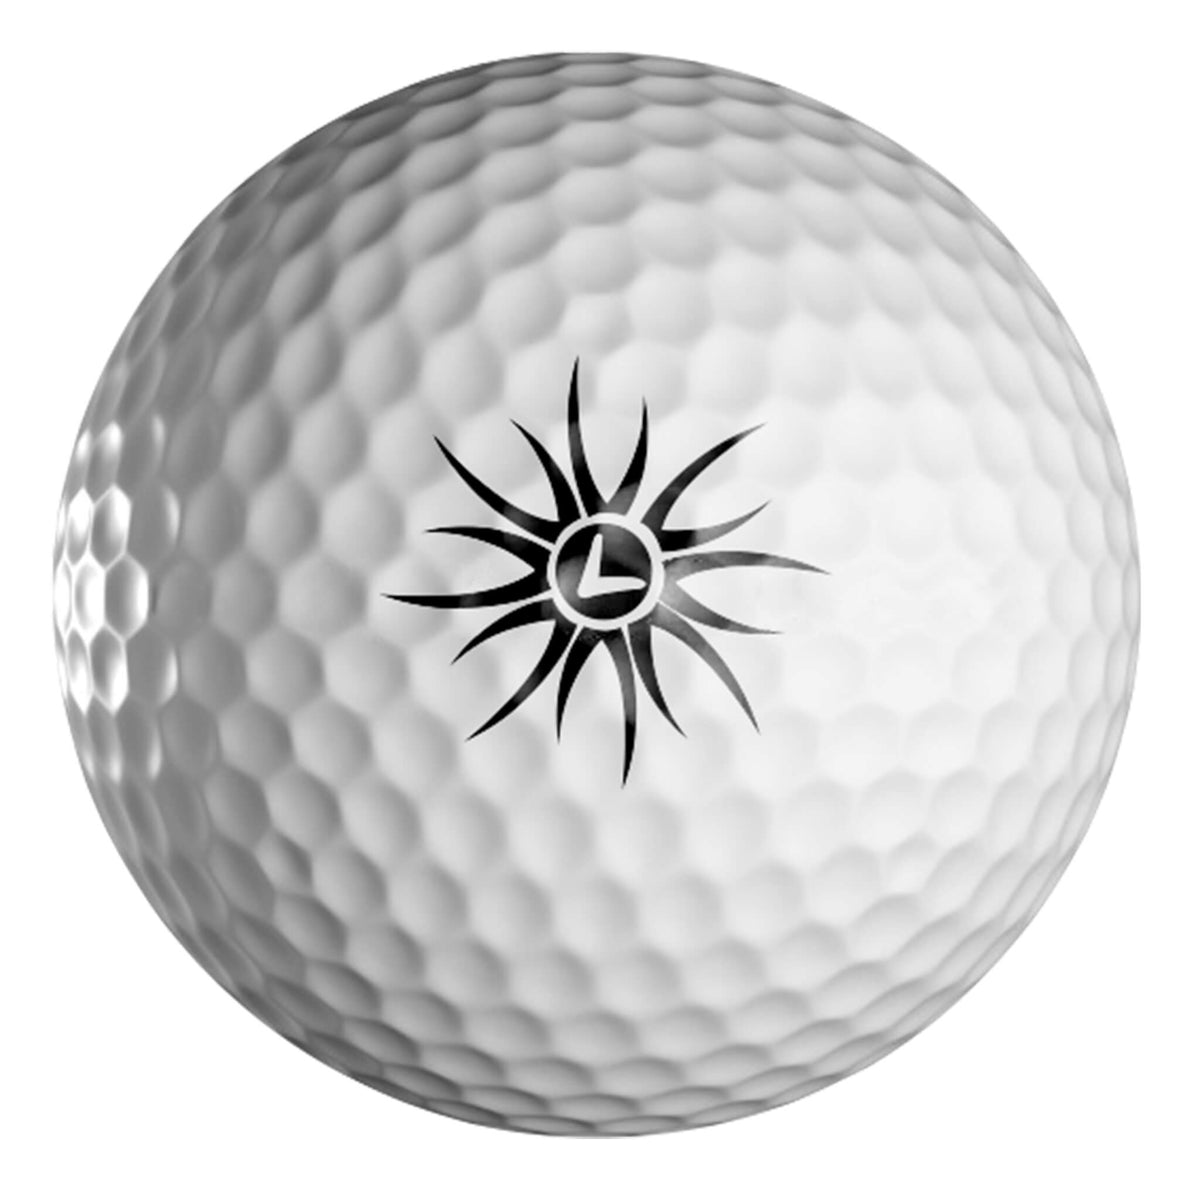 Callaway Solaire